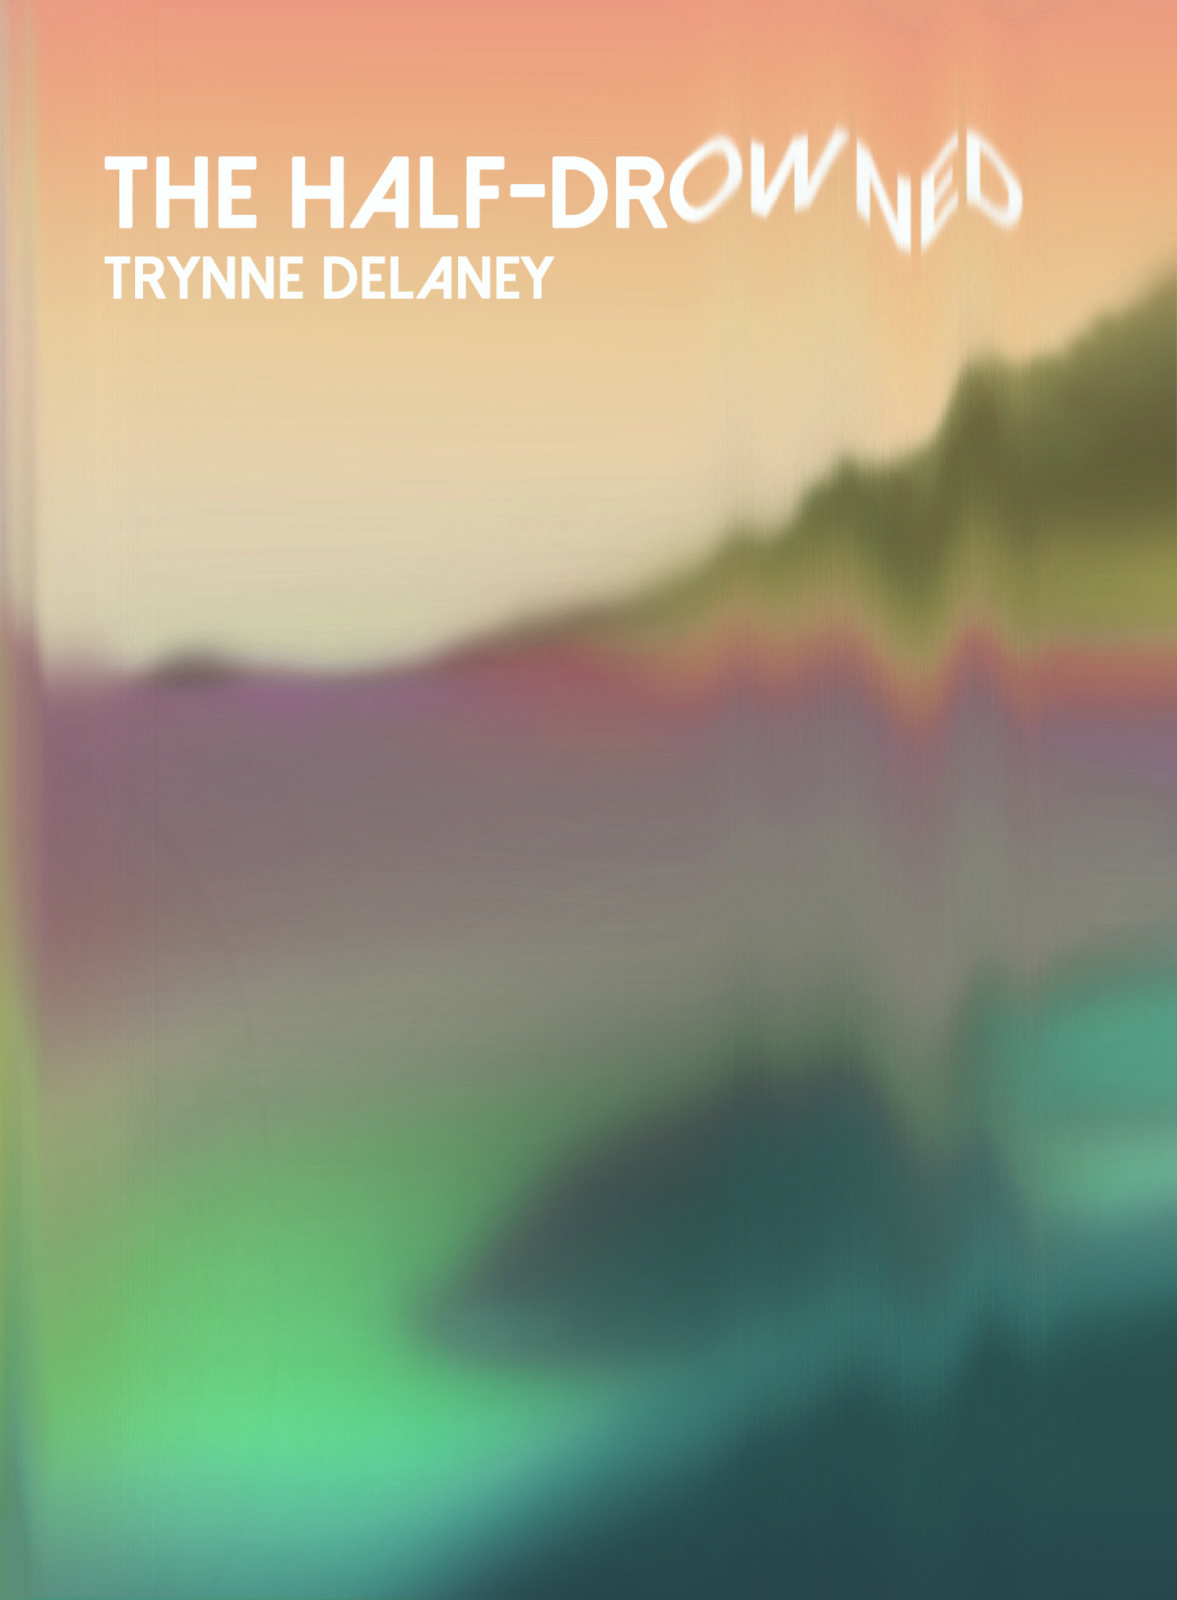 Trynne Delaney’s the half-drowned